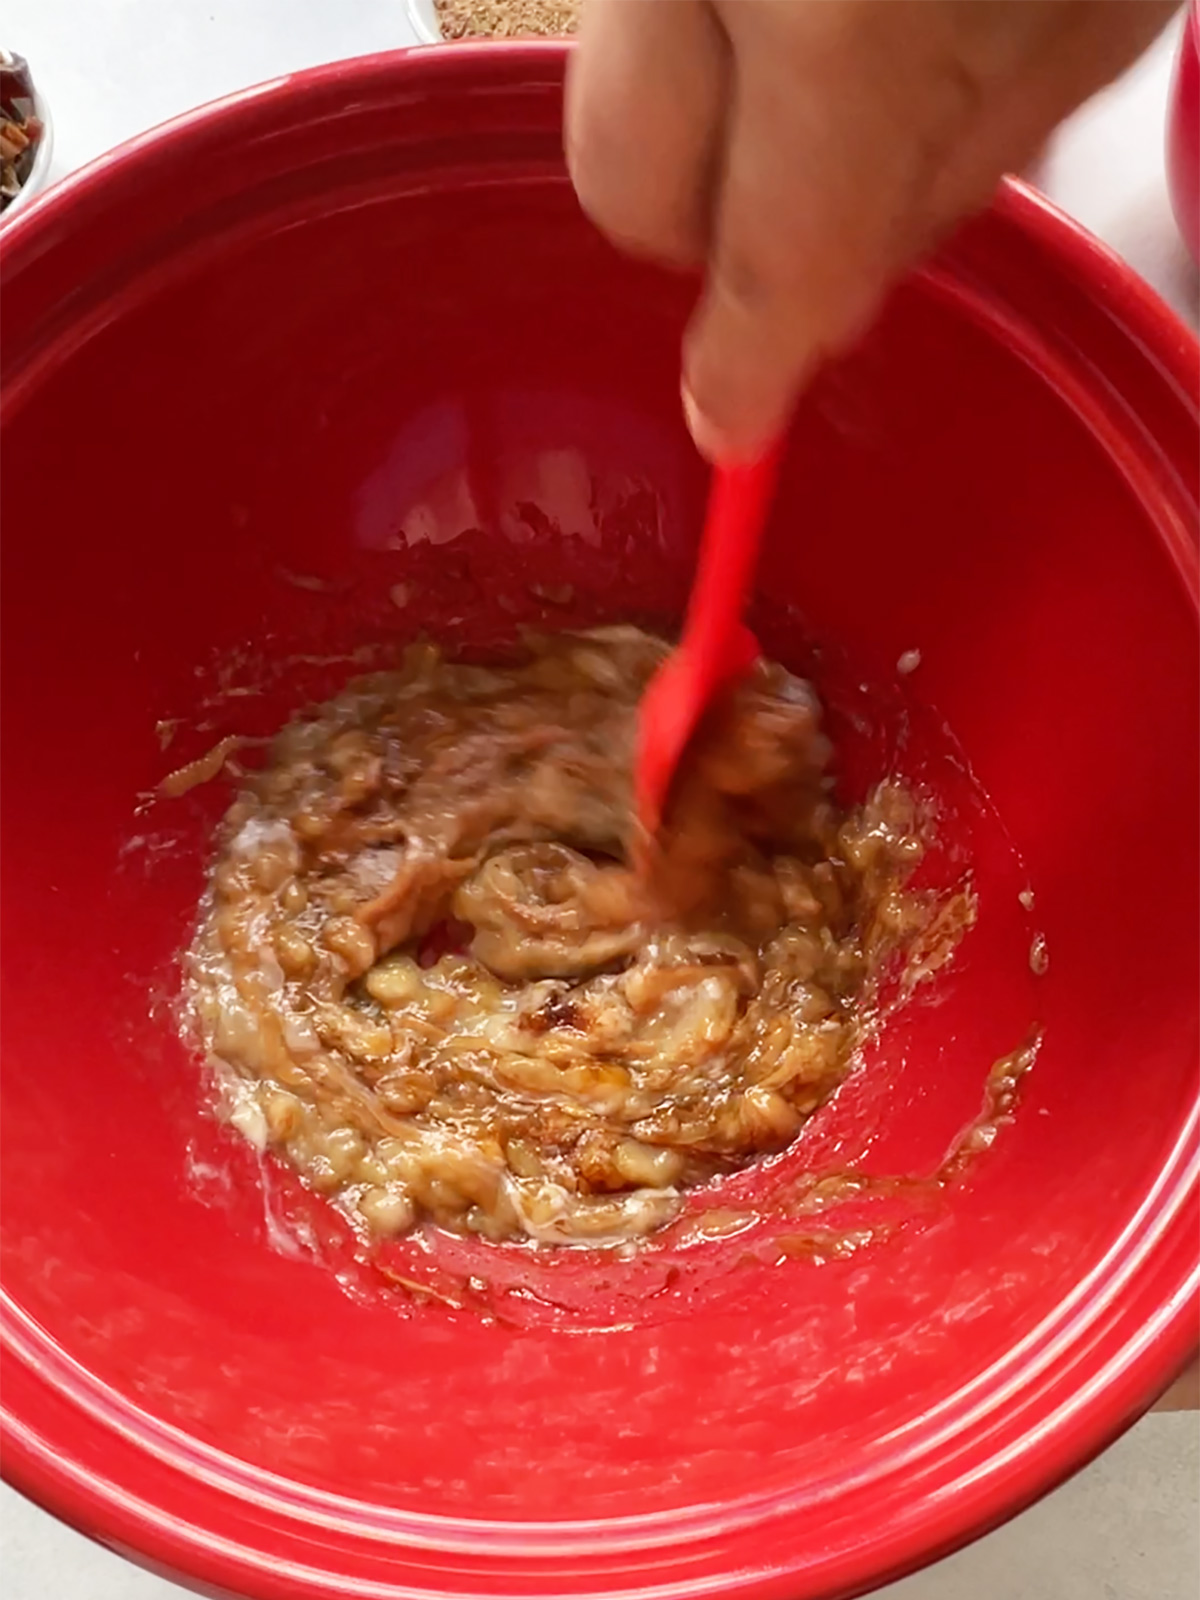 Mixing wet ingredients for banana oat bars in large red bowl with a red spoon.